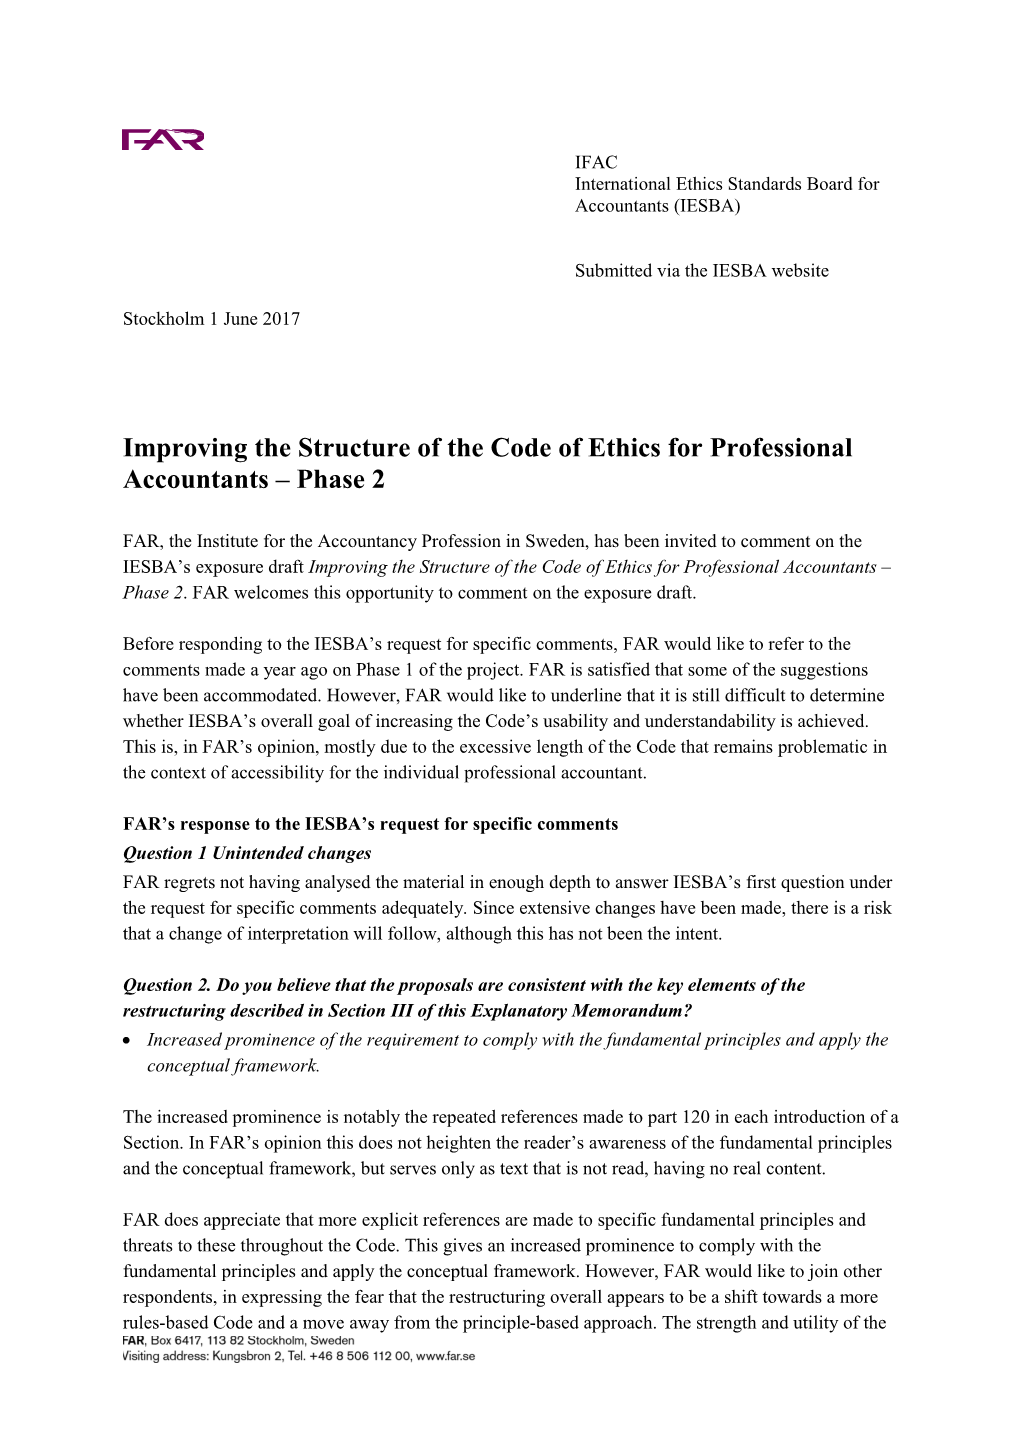 Improving the Structure of the Code of Ethics for Professional Accountants Phase 2